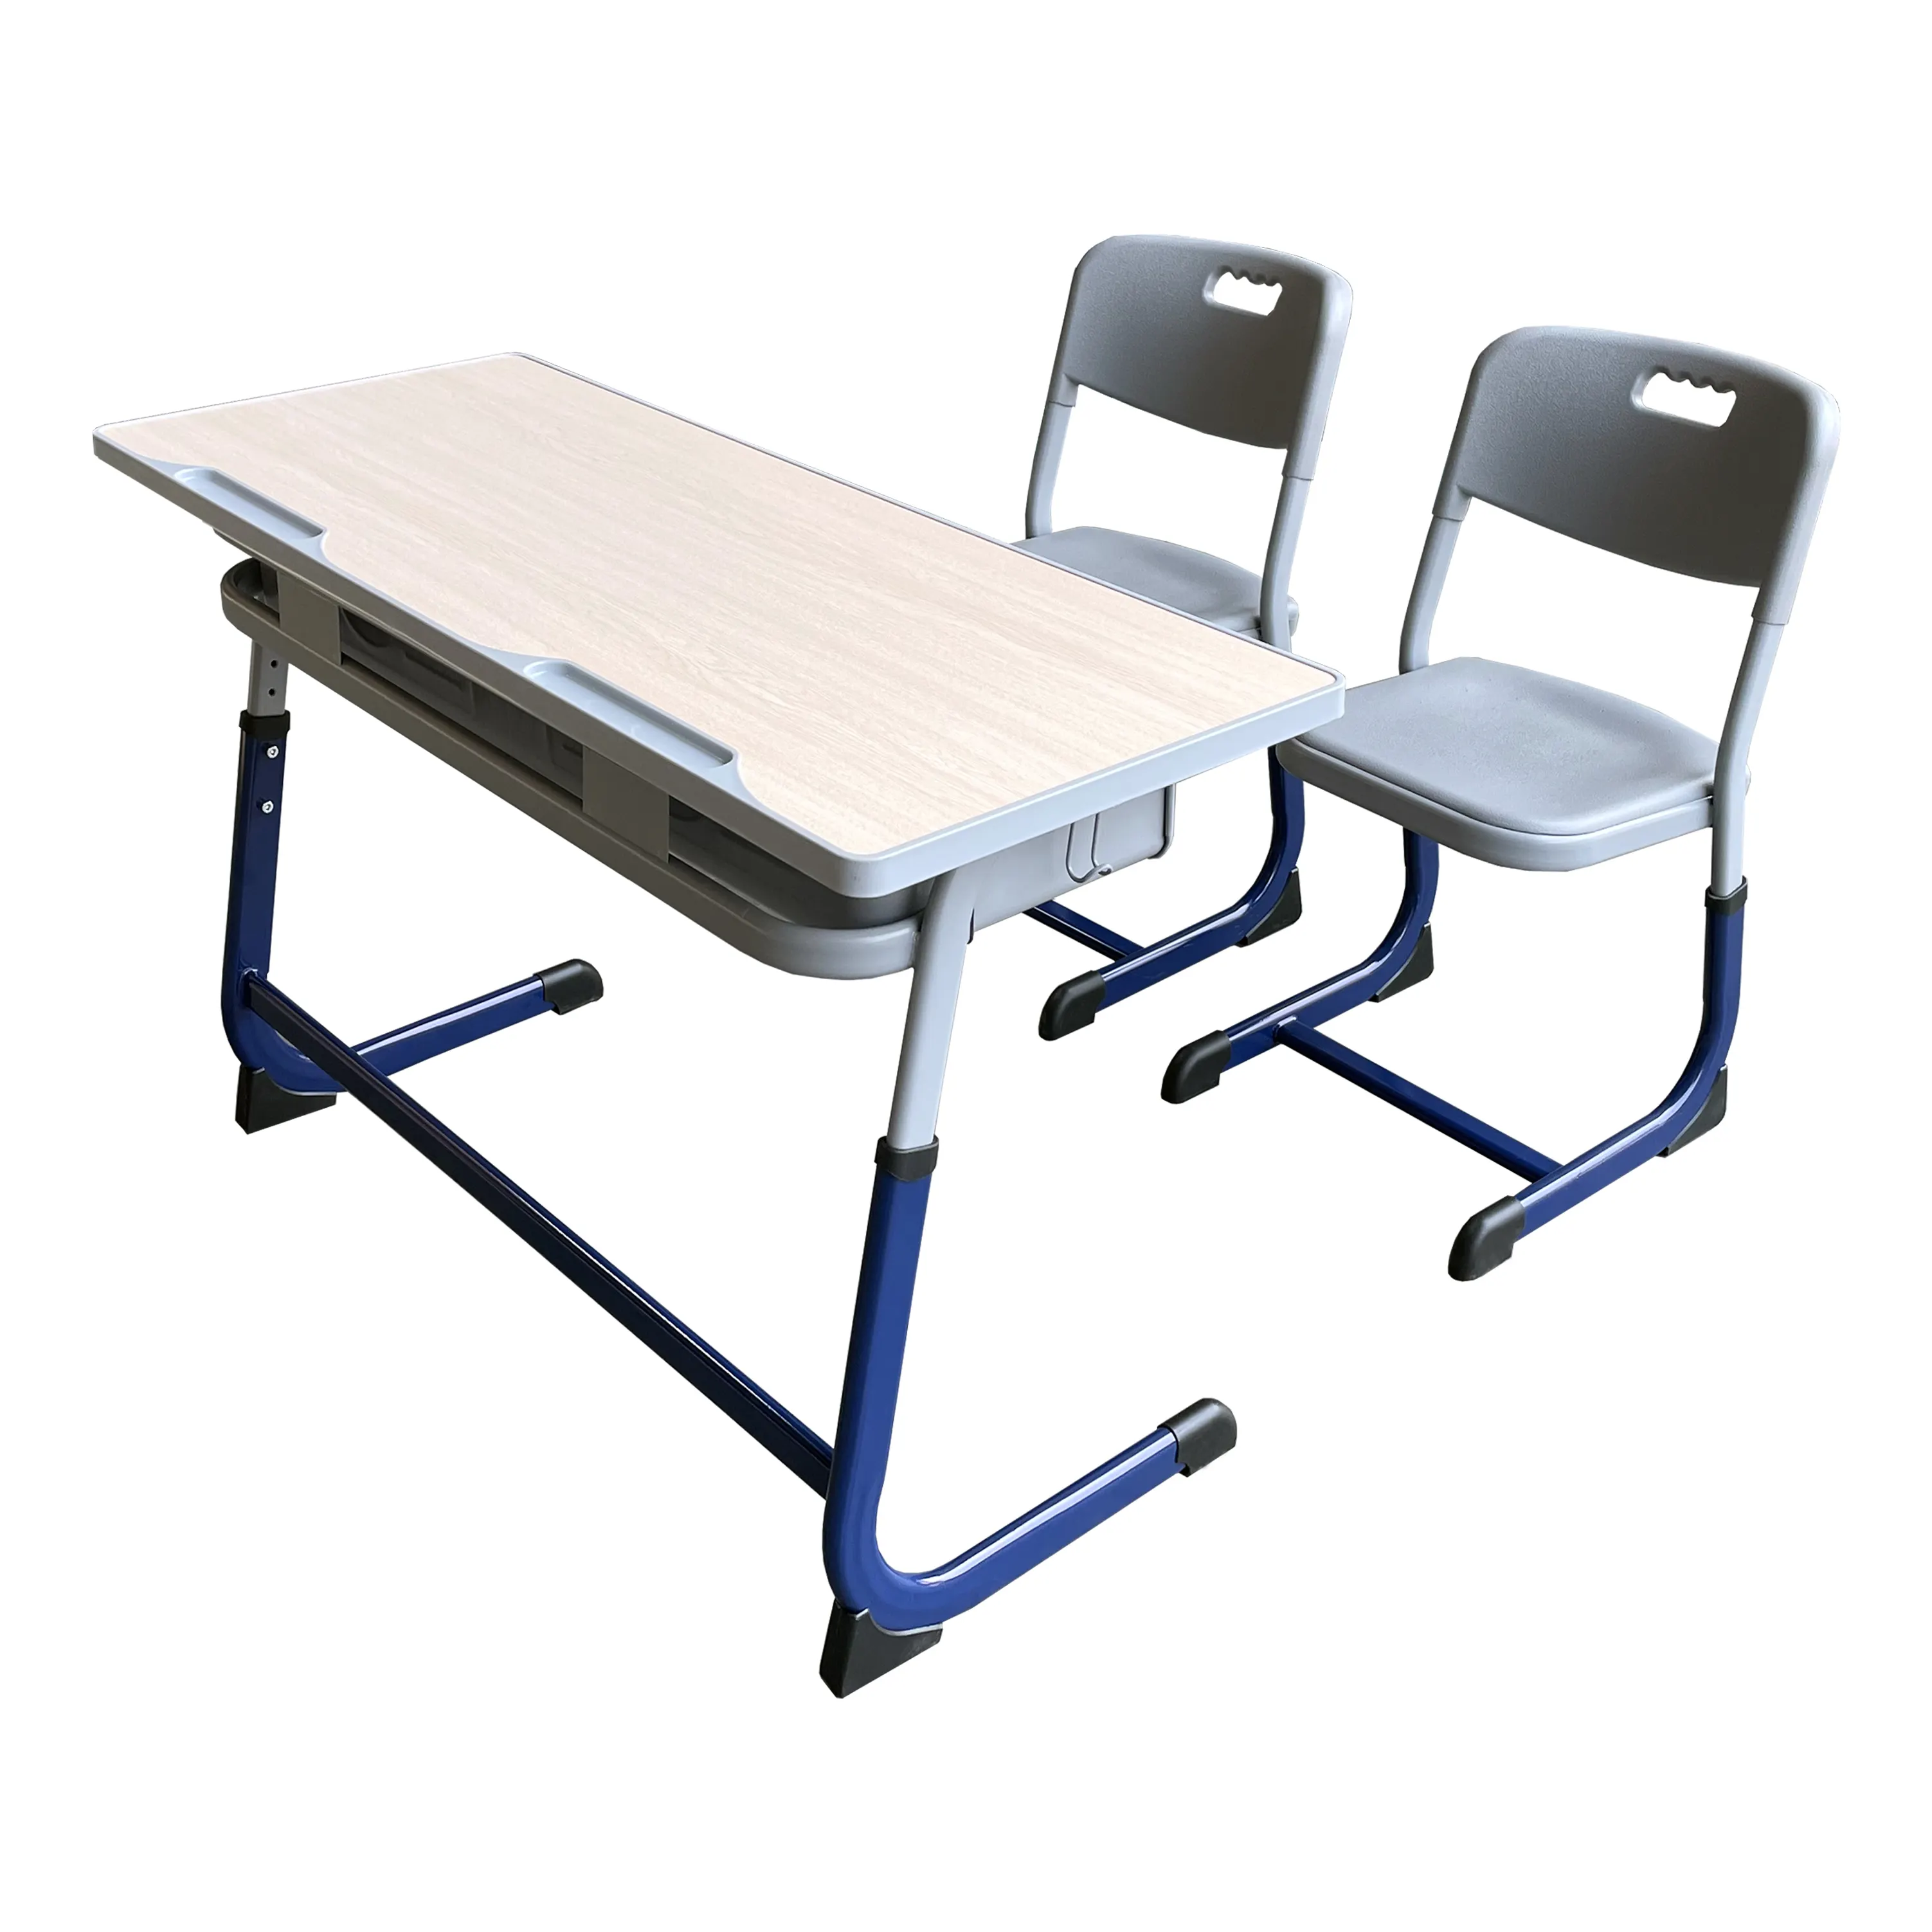 High School And College Classrooms Double Desks And Chairs For Students For 2 People Hot Sales Modular Mdf Desk Furniture Desk